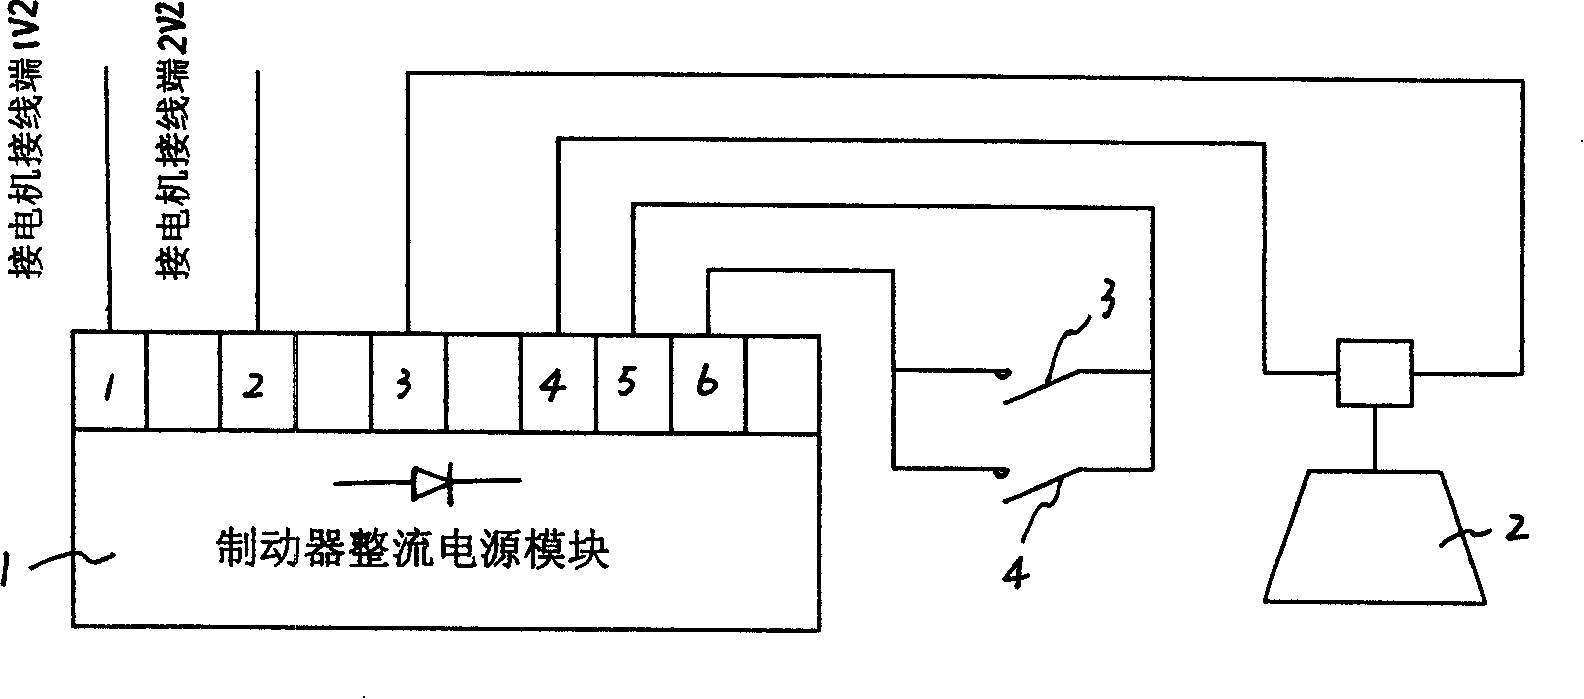 A power module for DC electromagnetic arrester